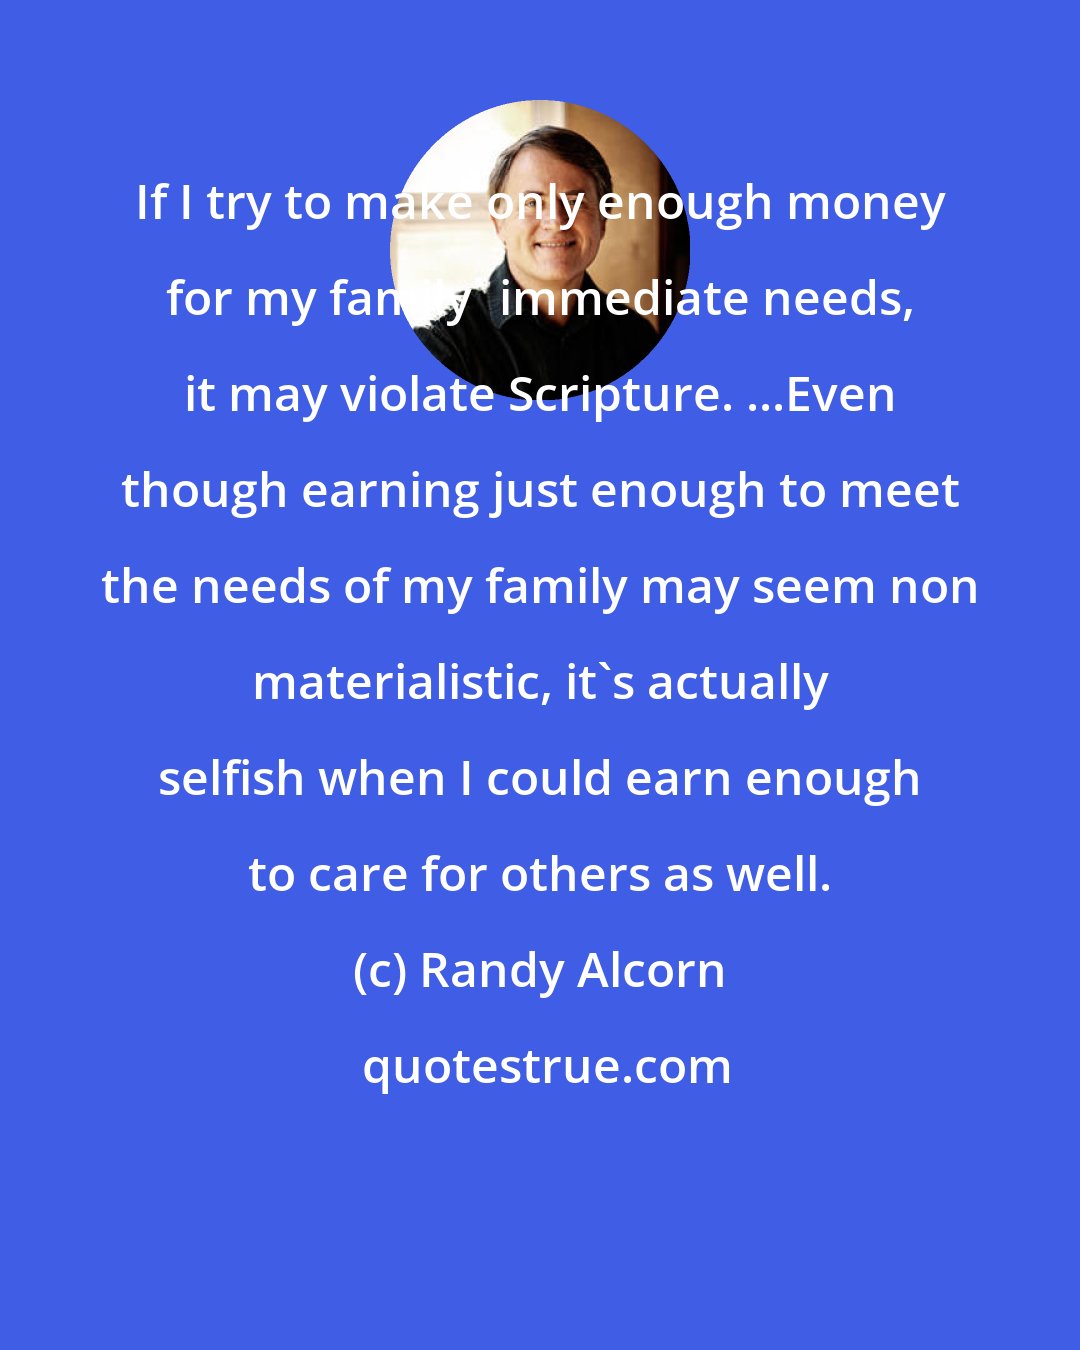 Randy Alcorn: If I try to make only enough money for my family' immediate needs, it may violate Scripture. ...Even though earning just enough to meet the needs of my family may seem non materialistic, it's actually selfish when I could earn enough to care for others as well.